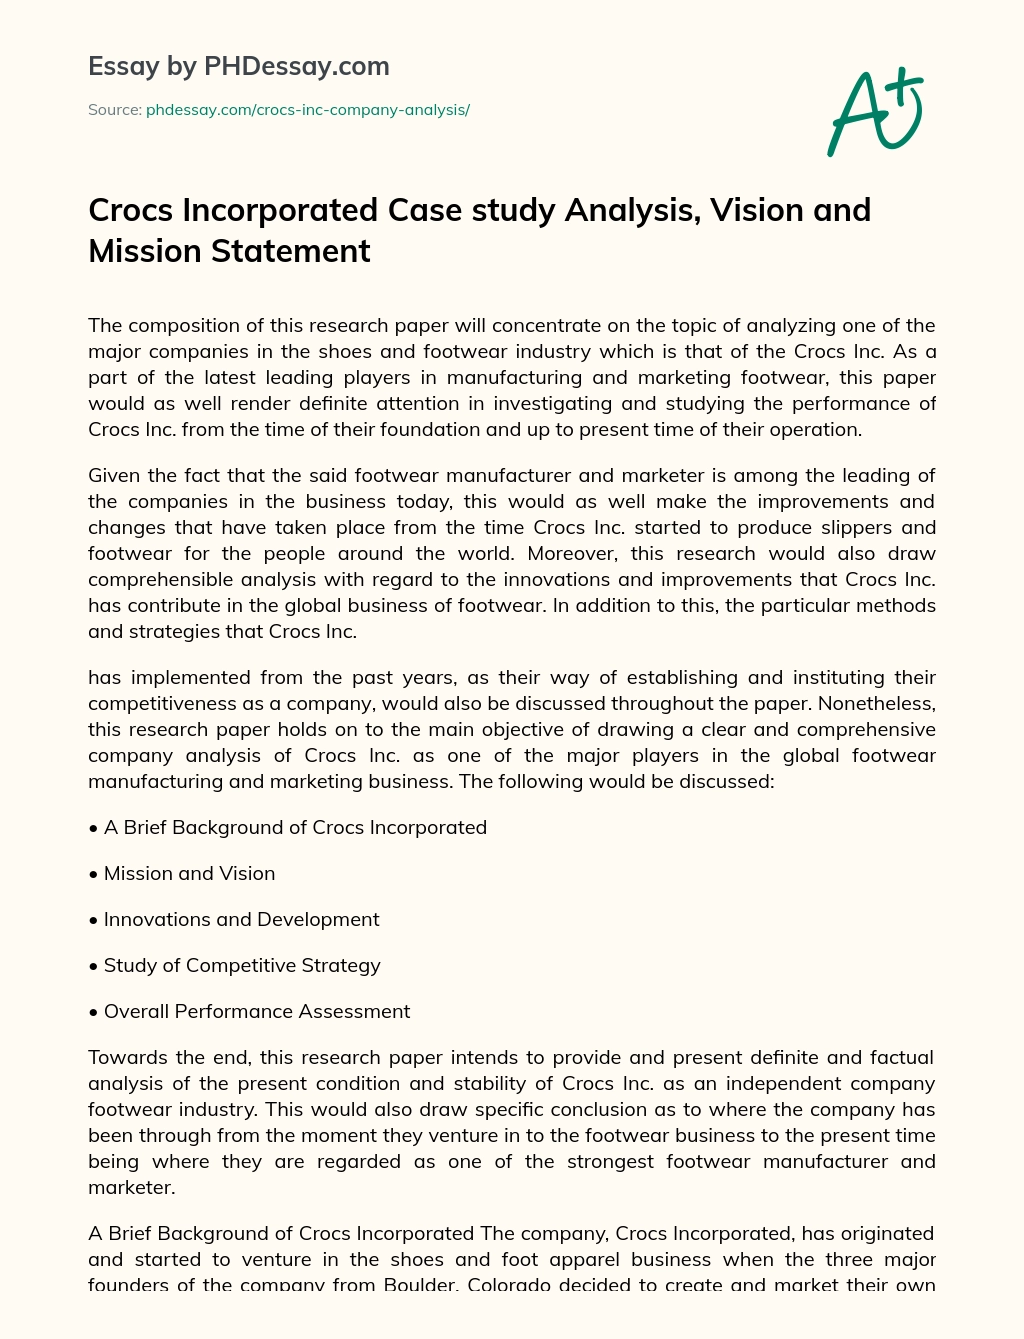 Crocs Incorporated Case study Analysis, Vision and Mission Statement essay